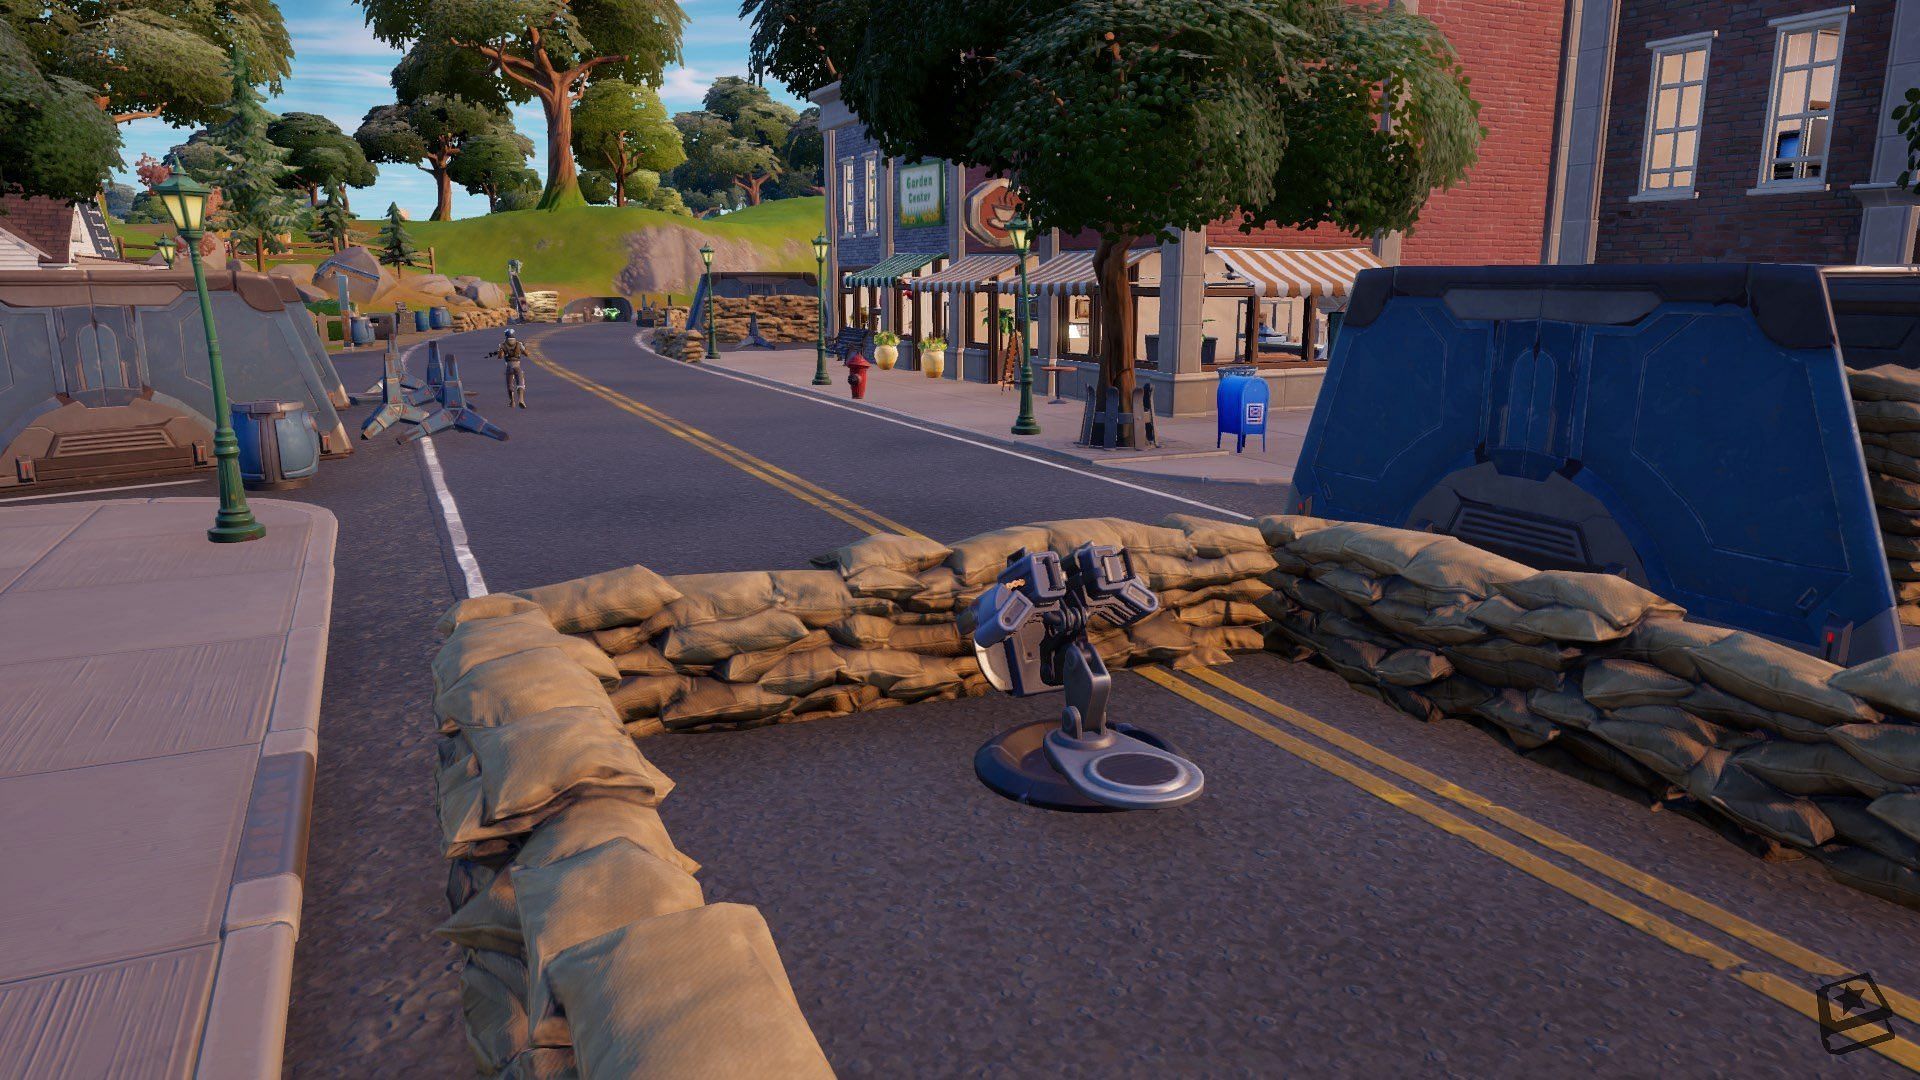 Blow up turrets for XP in Fortnite Chapter 3 (Image via Twitter/FN_Assist)